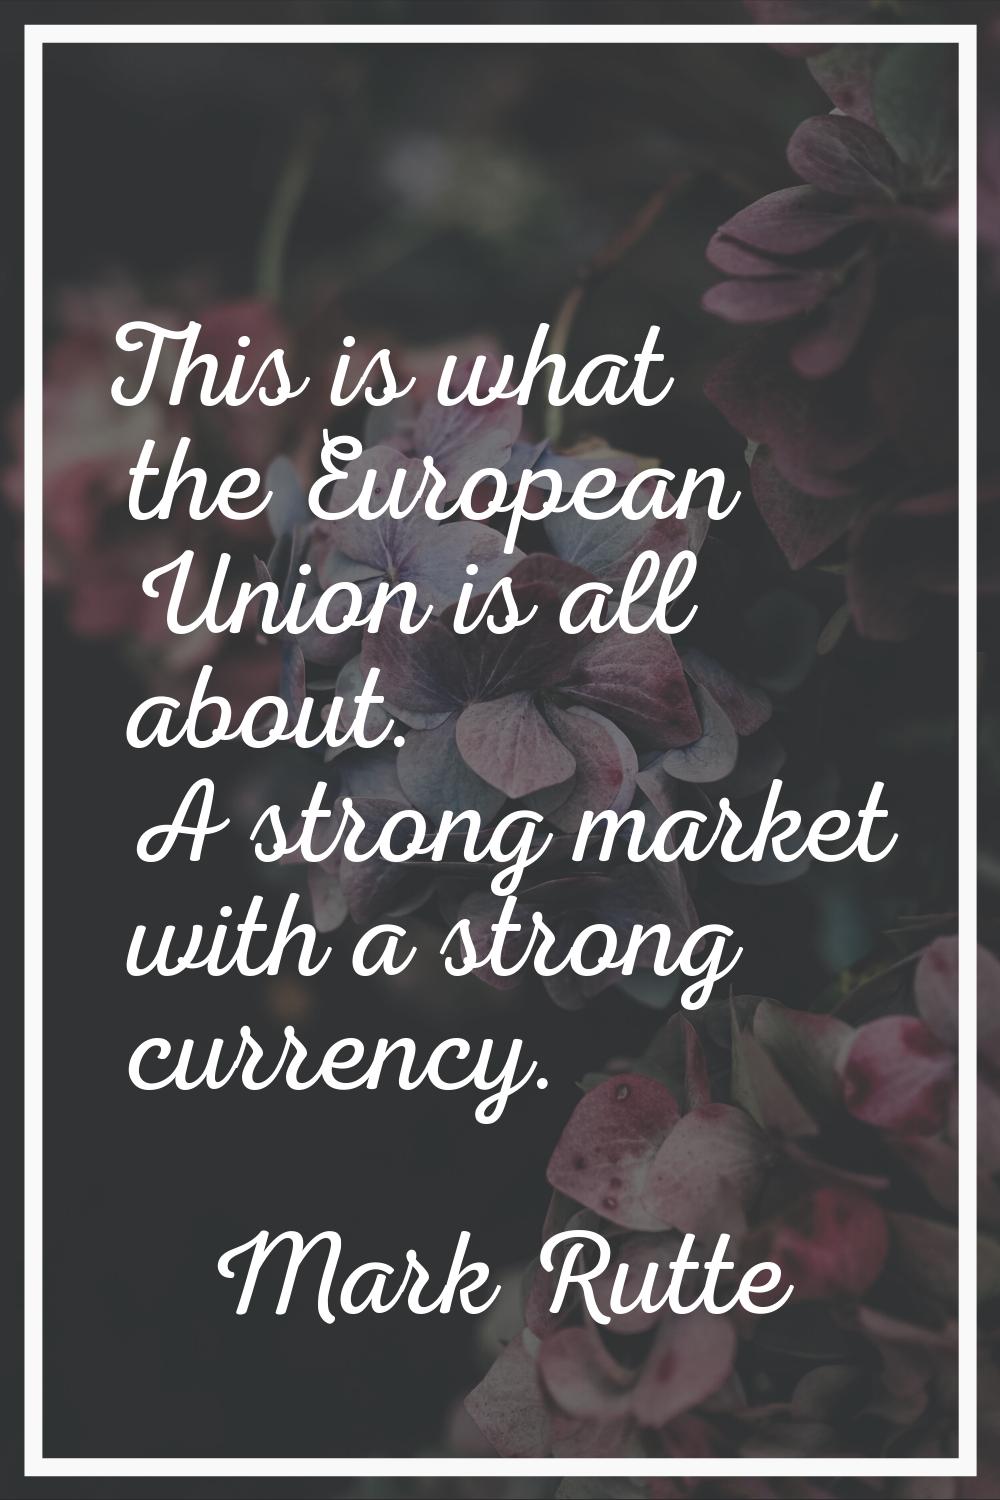 This is what the European Union is all about. A strong market with a strong currency.